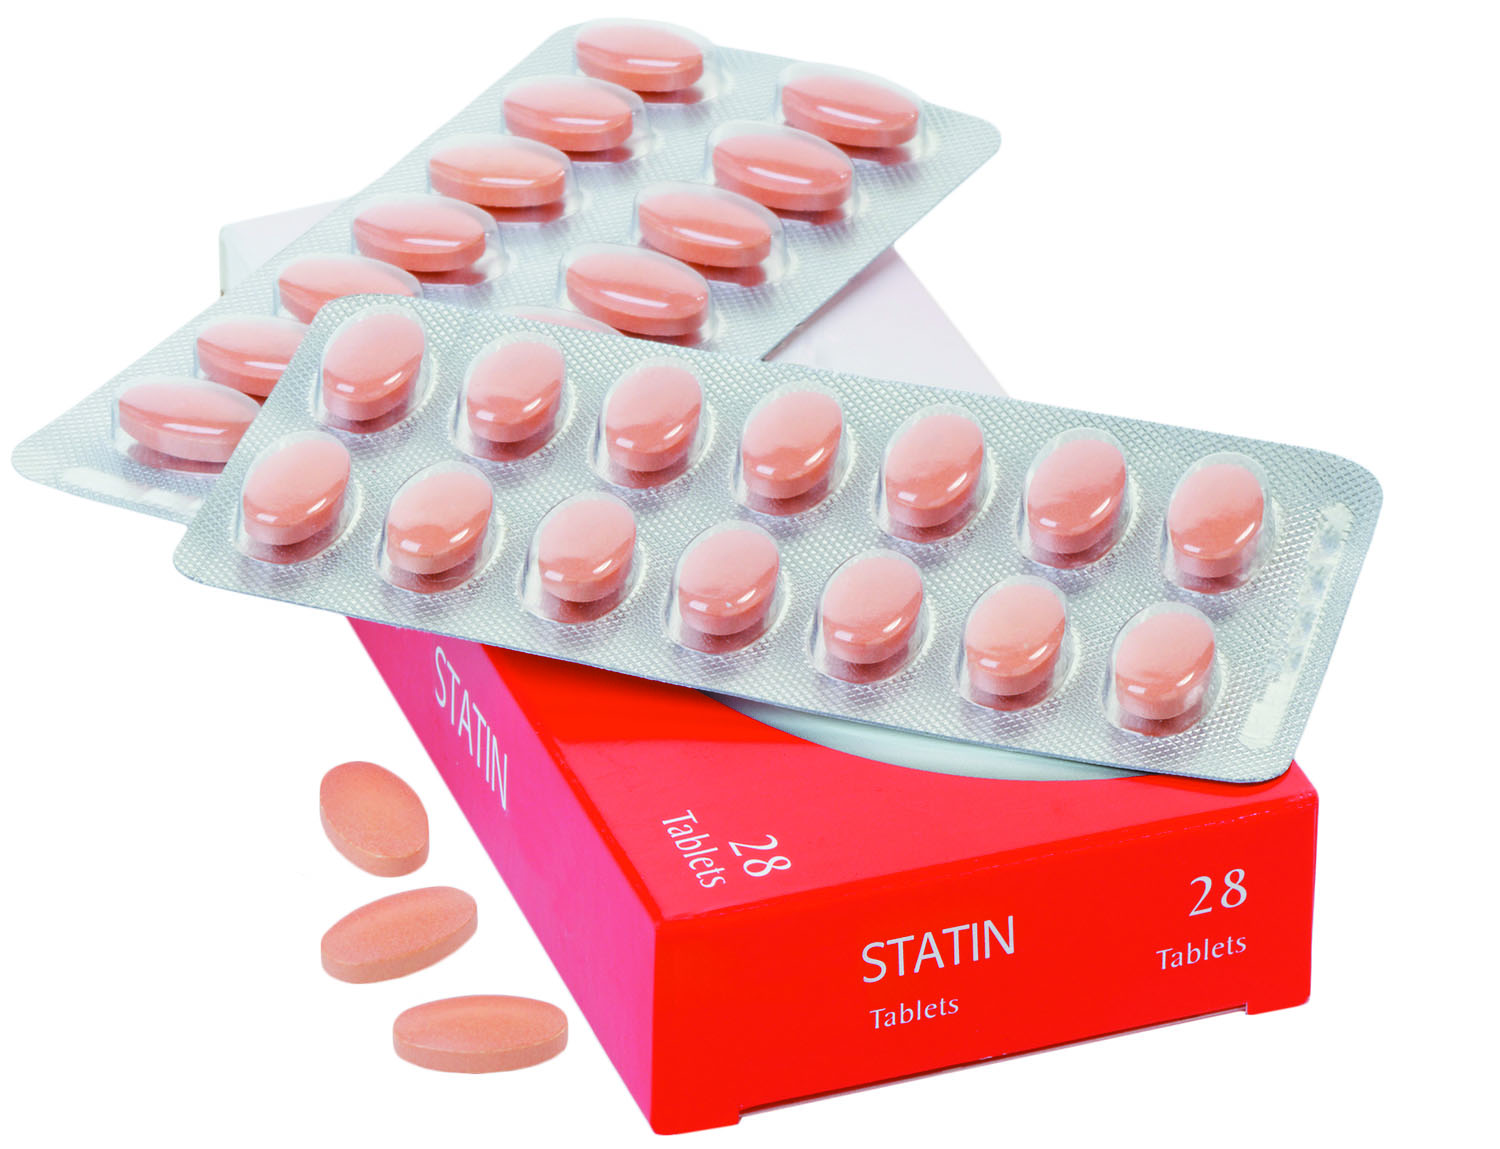 STATIN SIDE EFFECTS